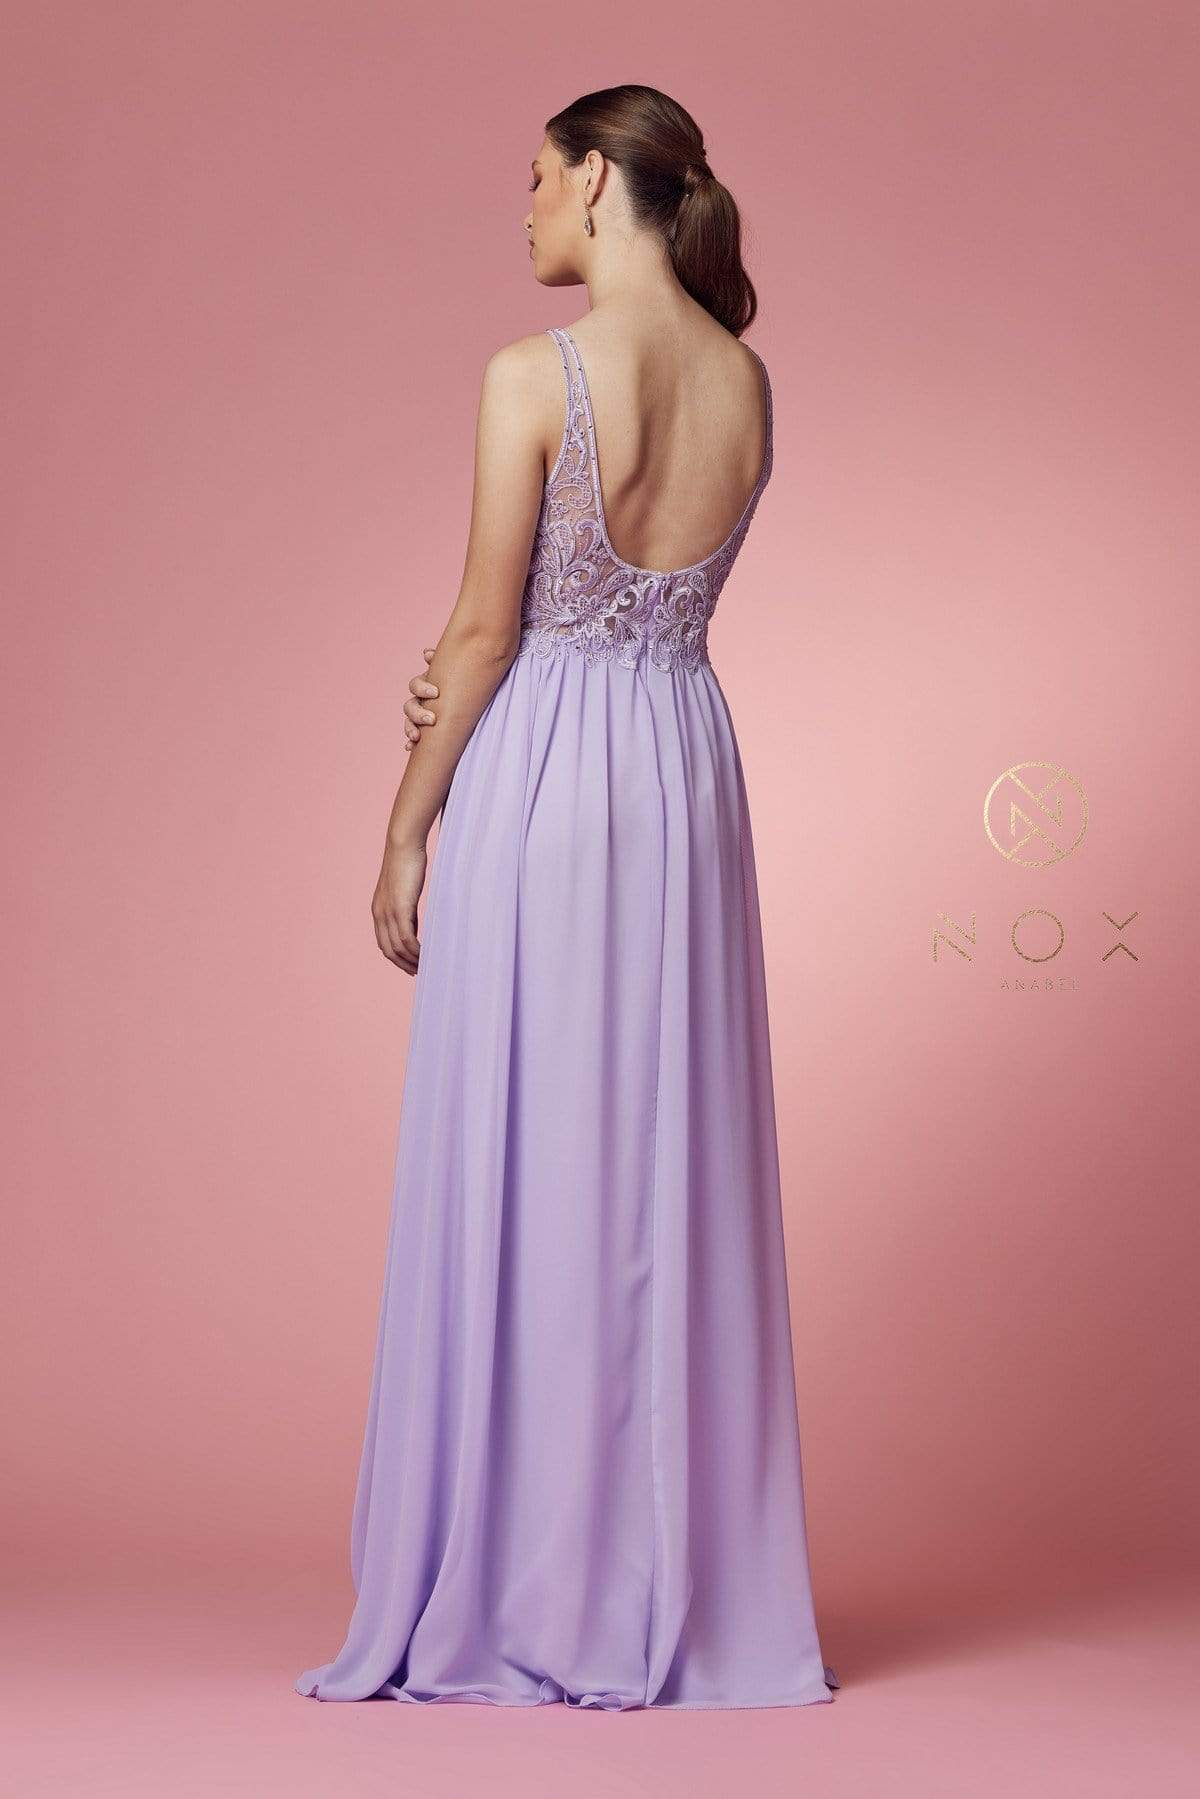 Nox Anabel - Y299 Sleeveless Beaded Lace Applique Bodice A-Line Gown Evening Dresses